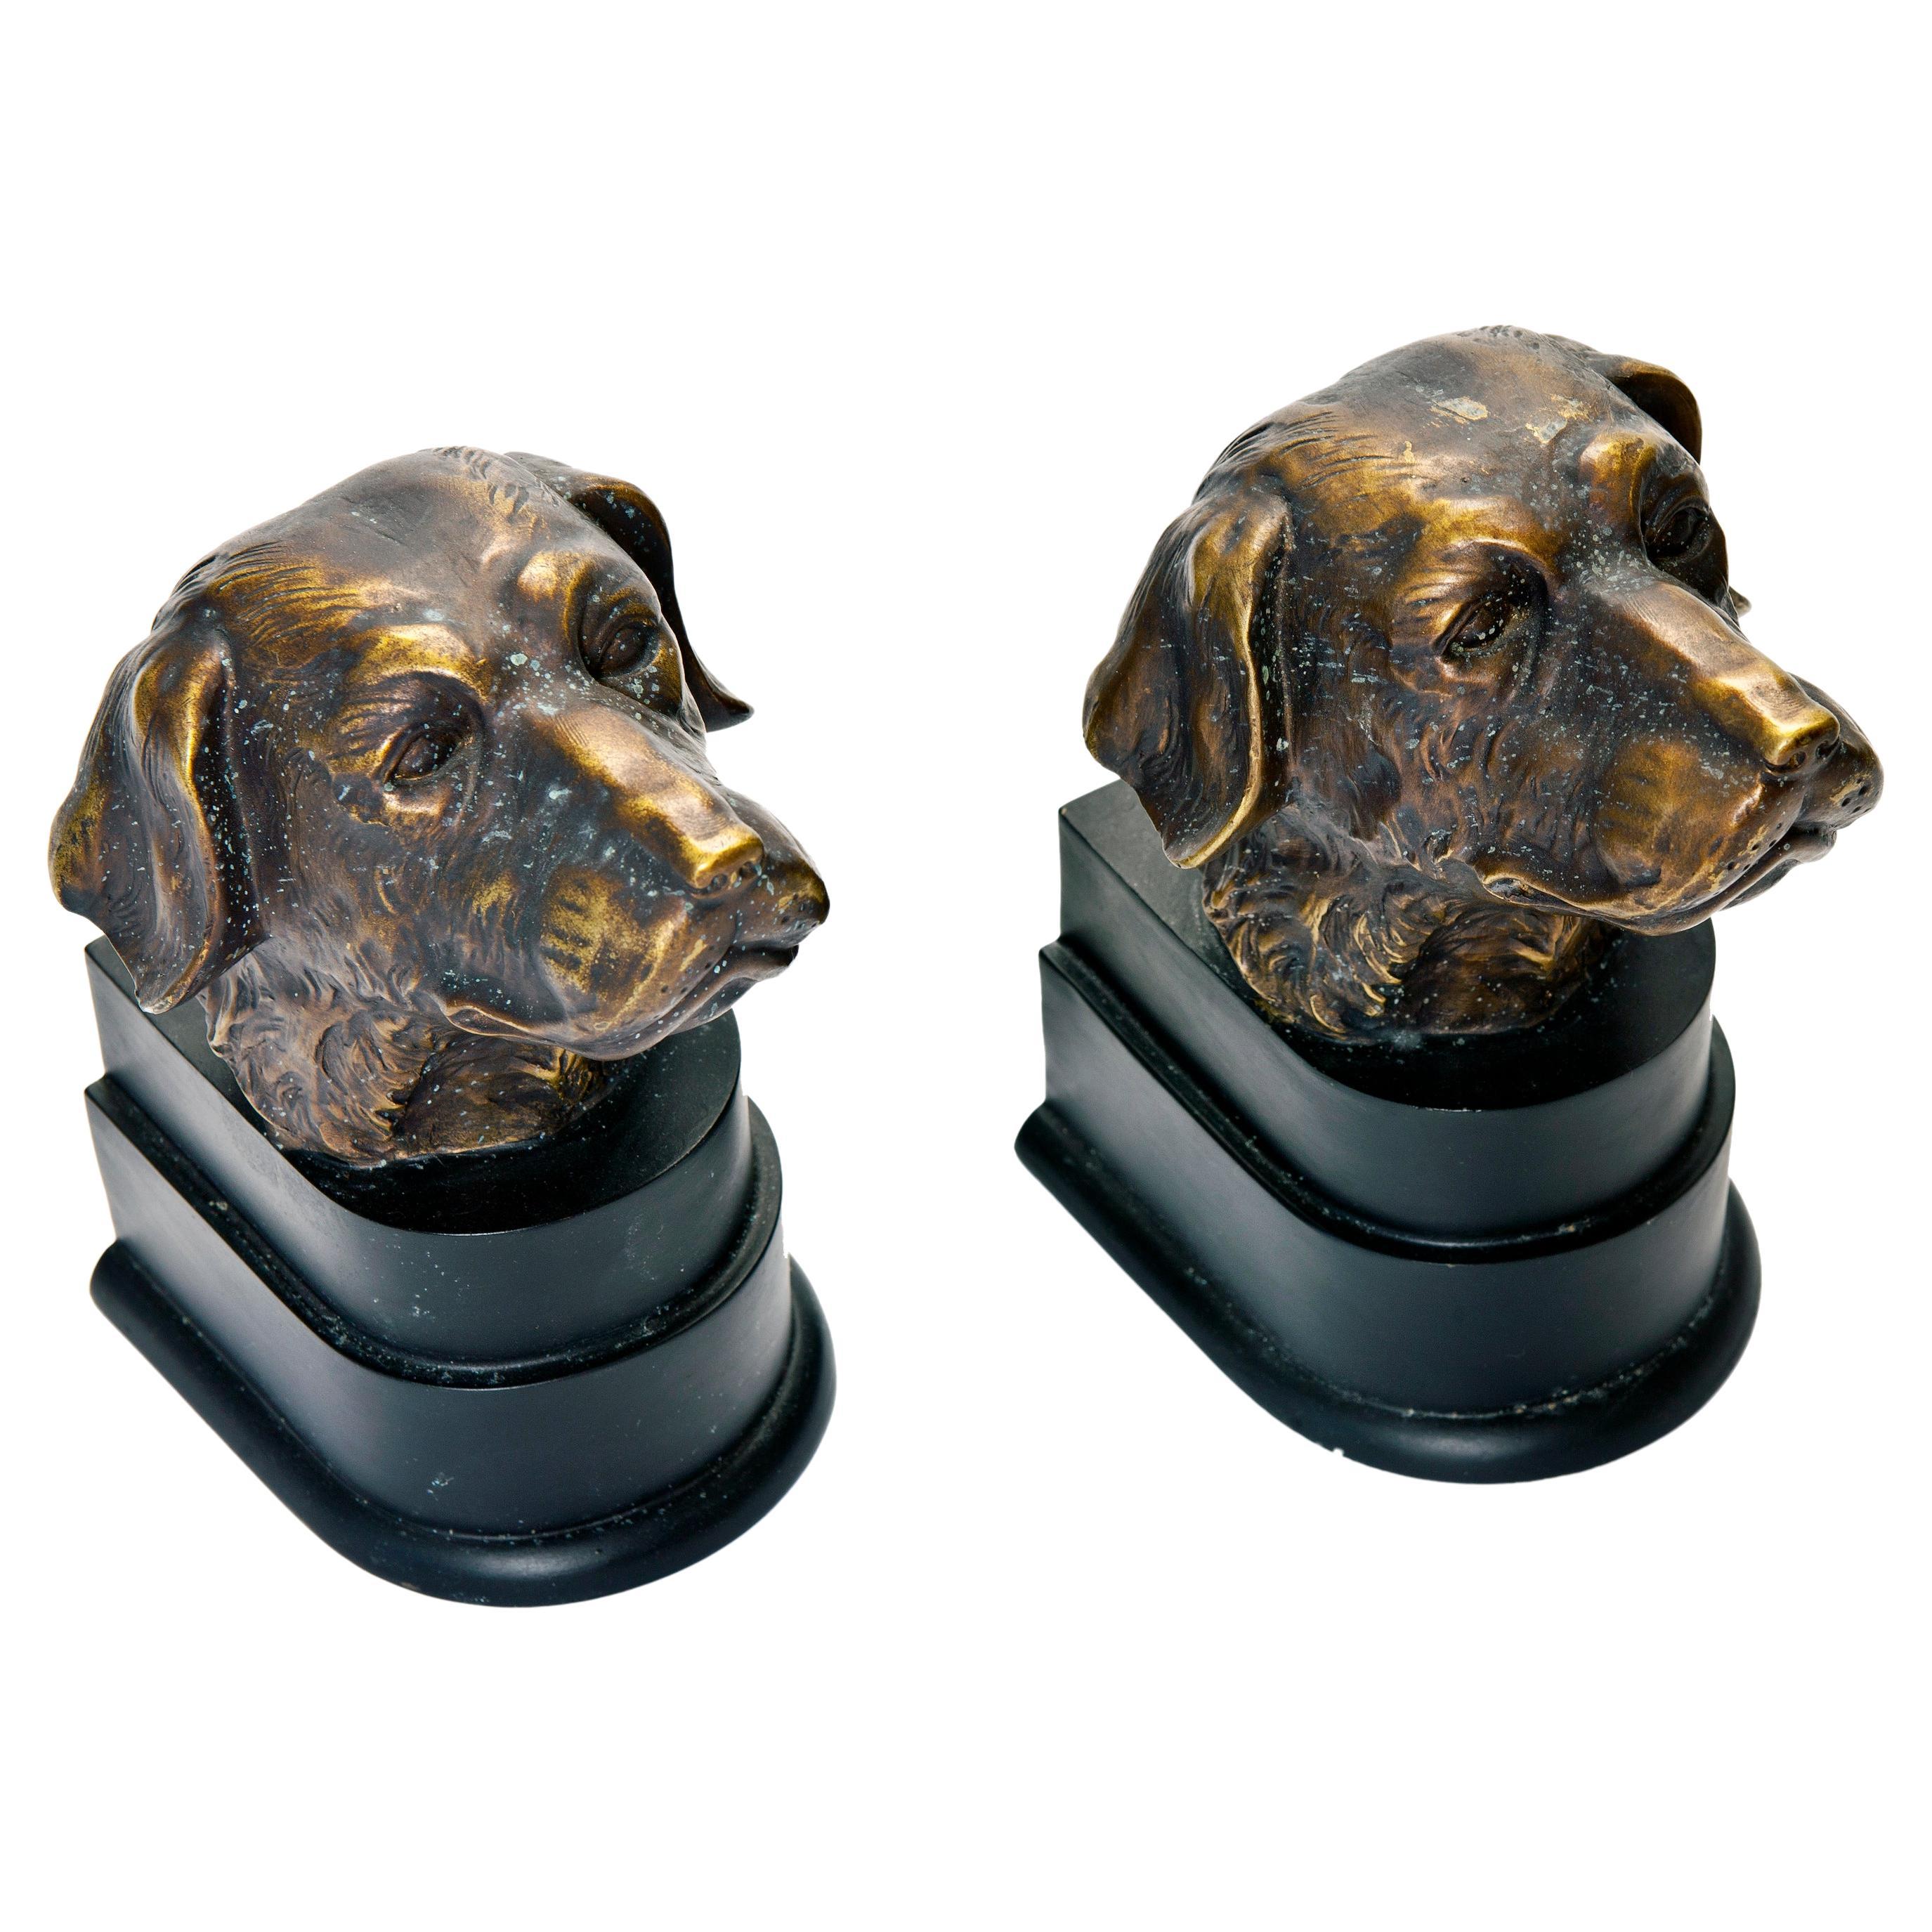 Beautiful pair of retrievers head bookends on black pedestals.
Cold cast with a bronze finish. New felt bottoms.